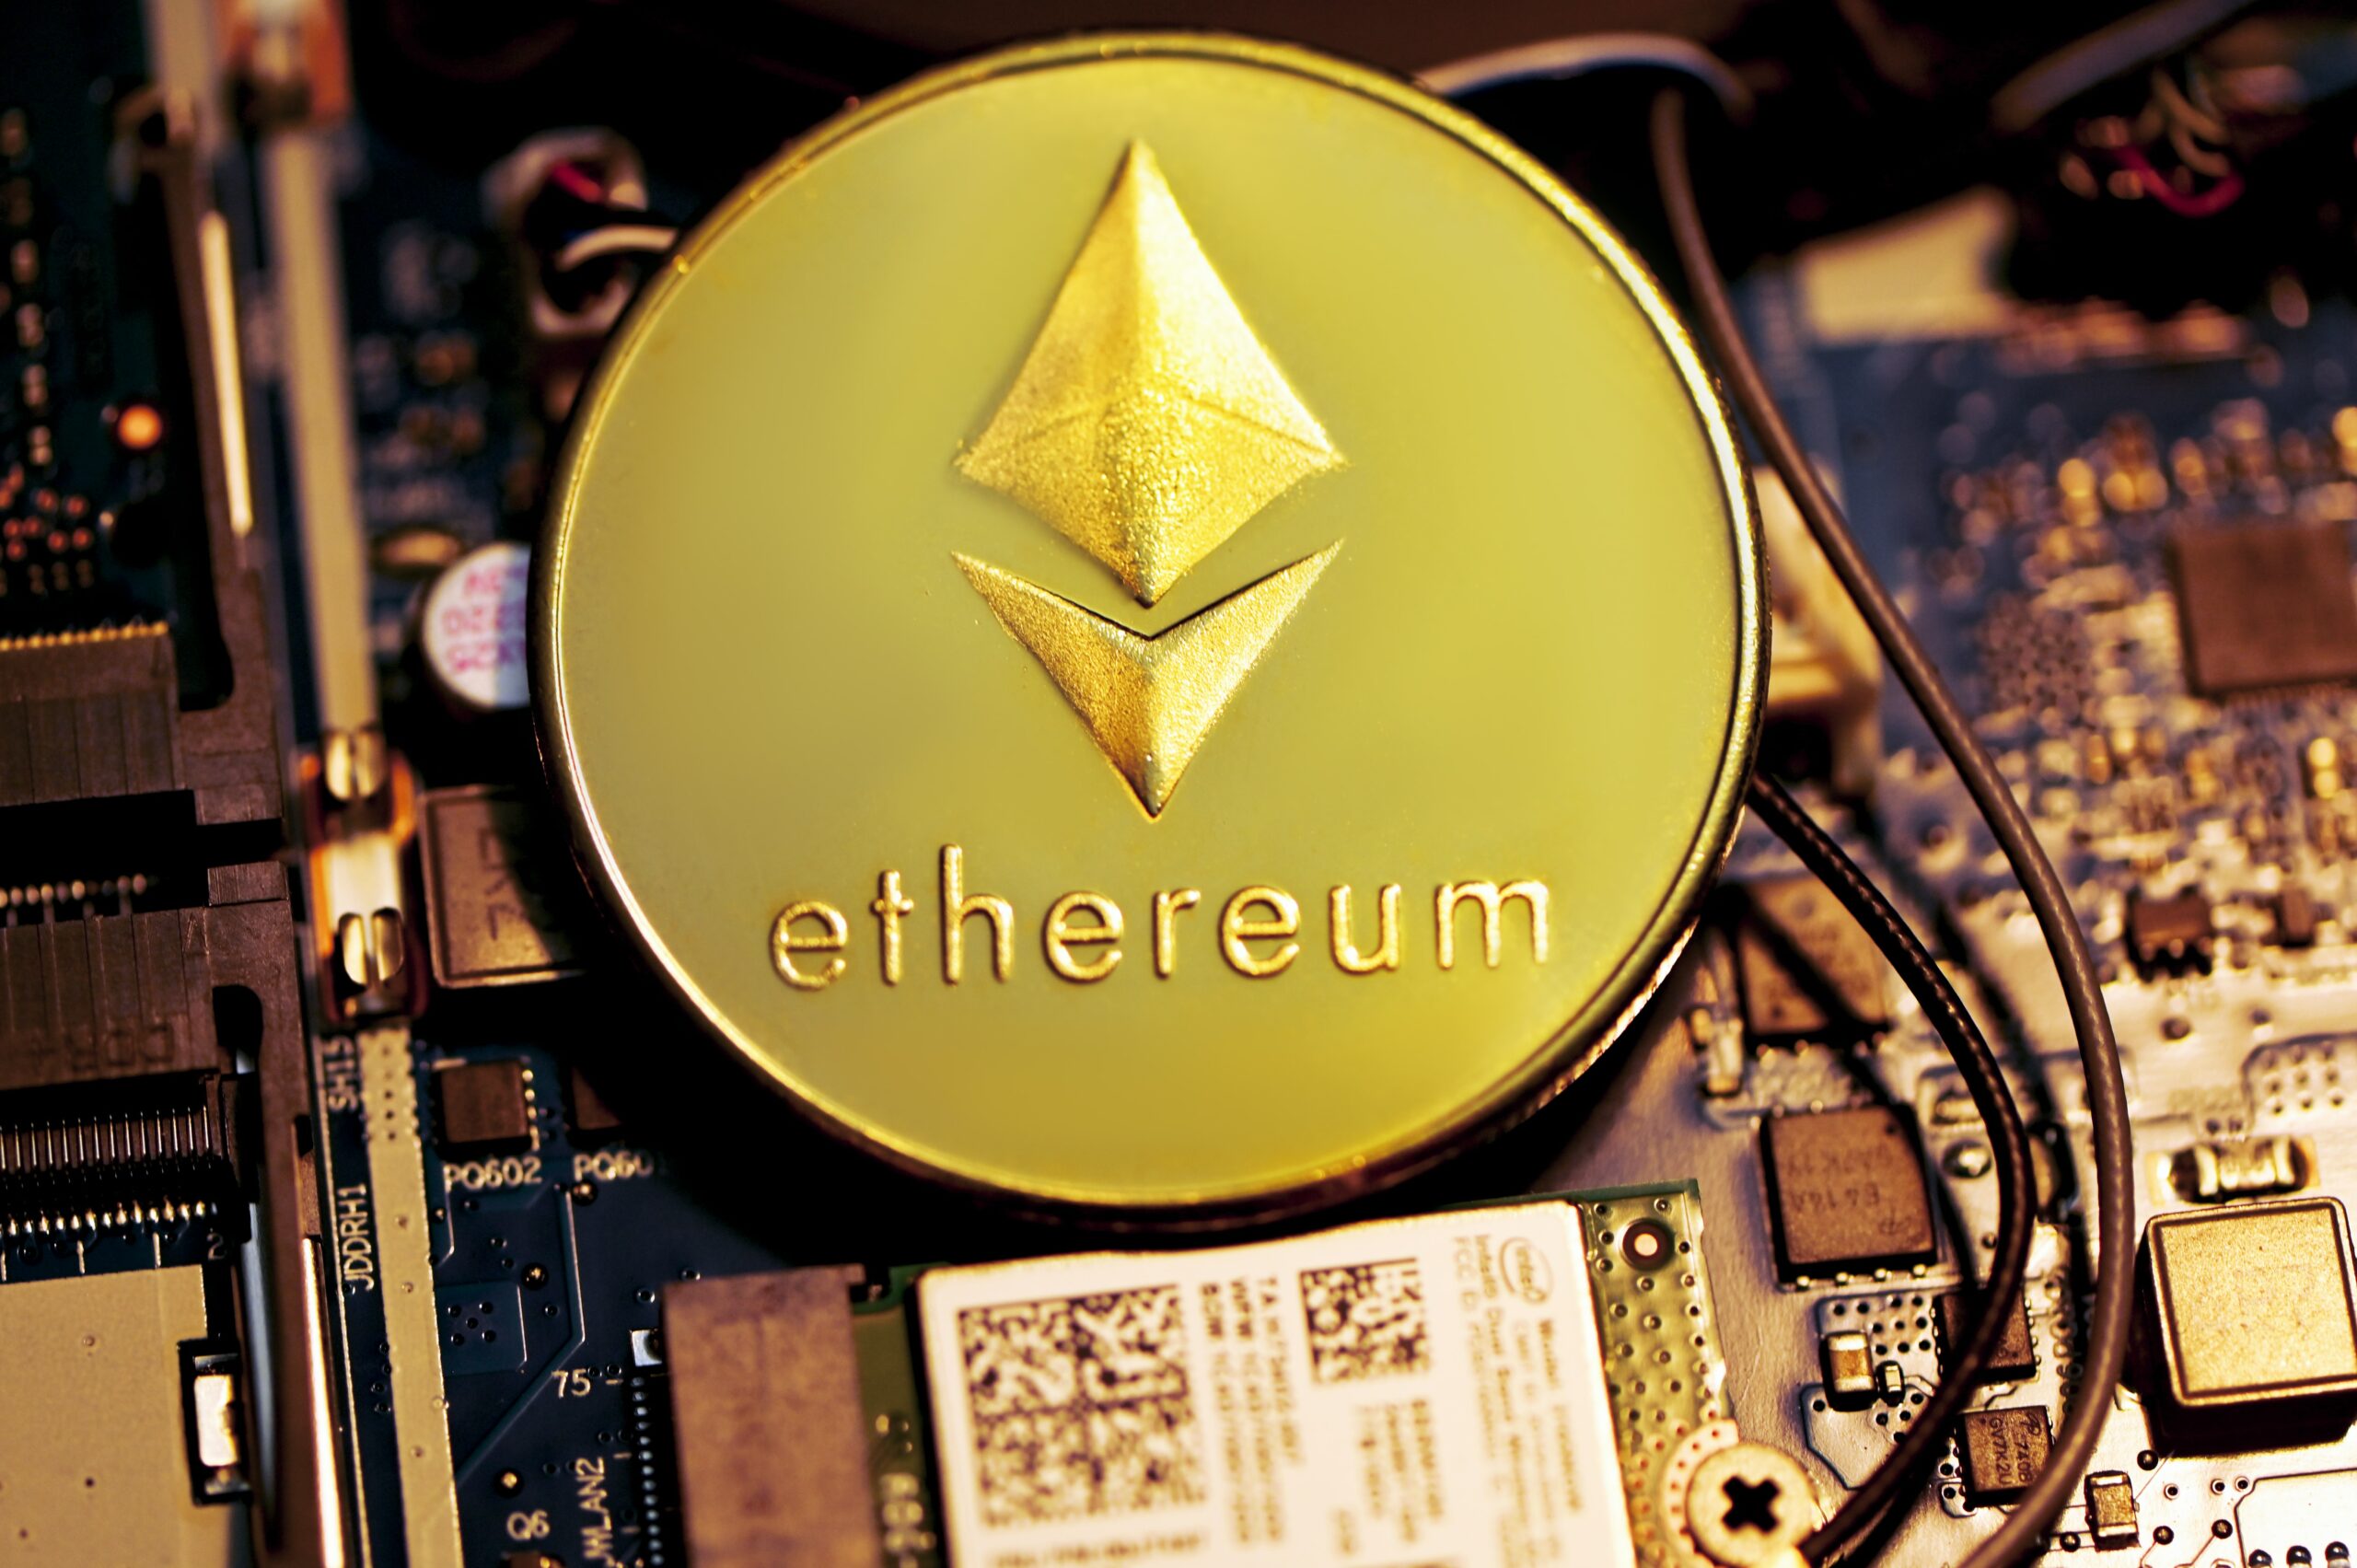 Therefore, investing in Ethereum would be wise now